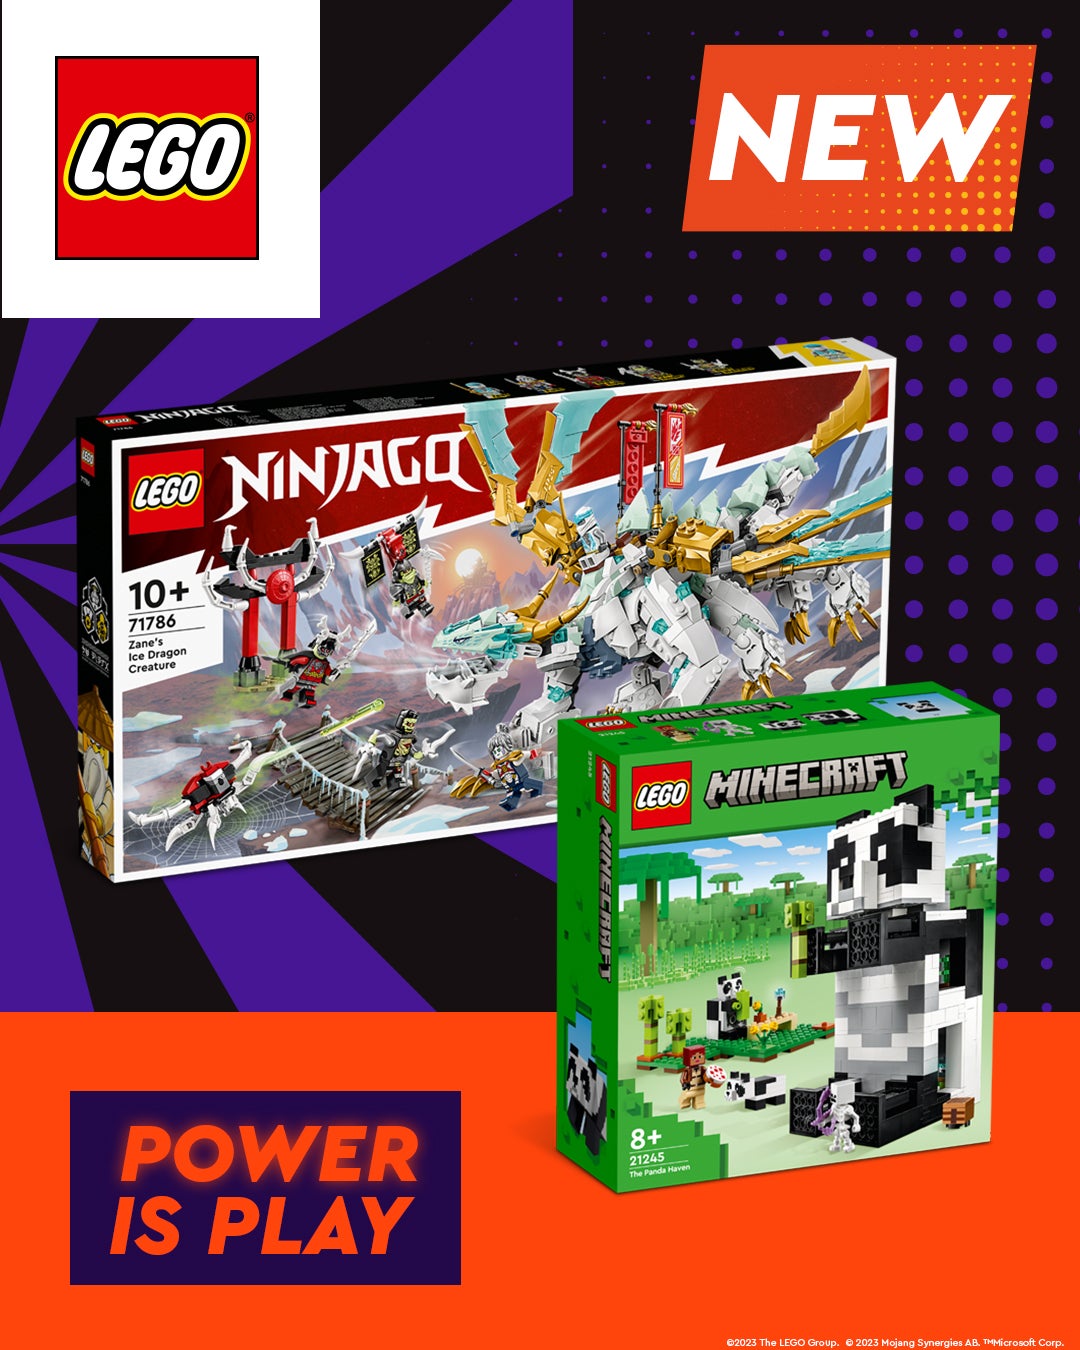 CHECK OUT NEW IN LEGO® SETS